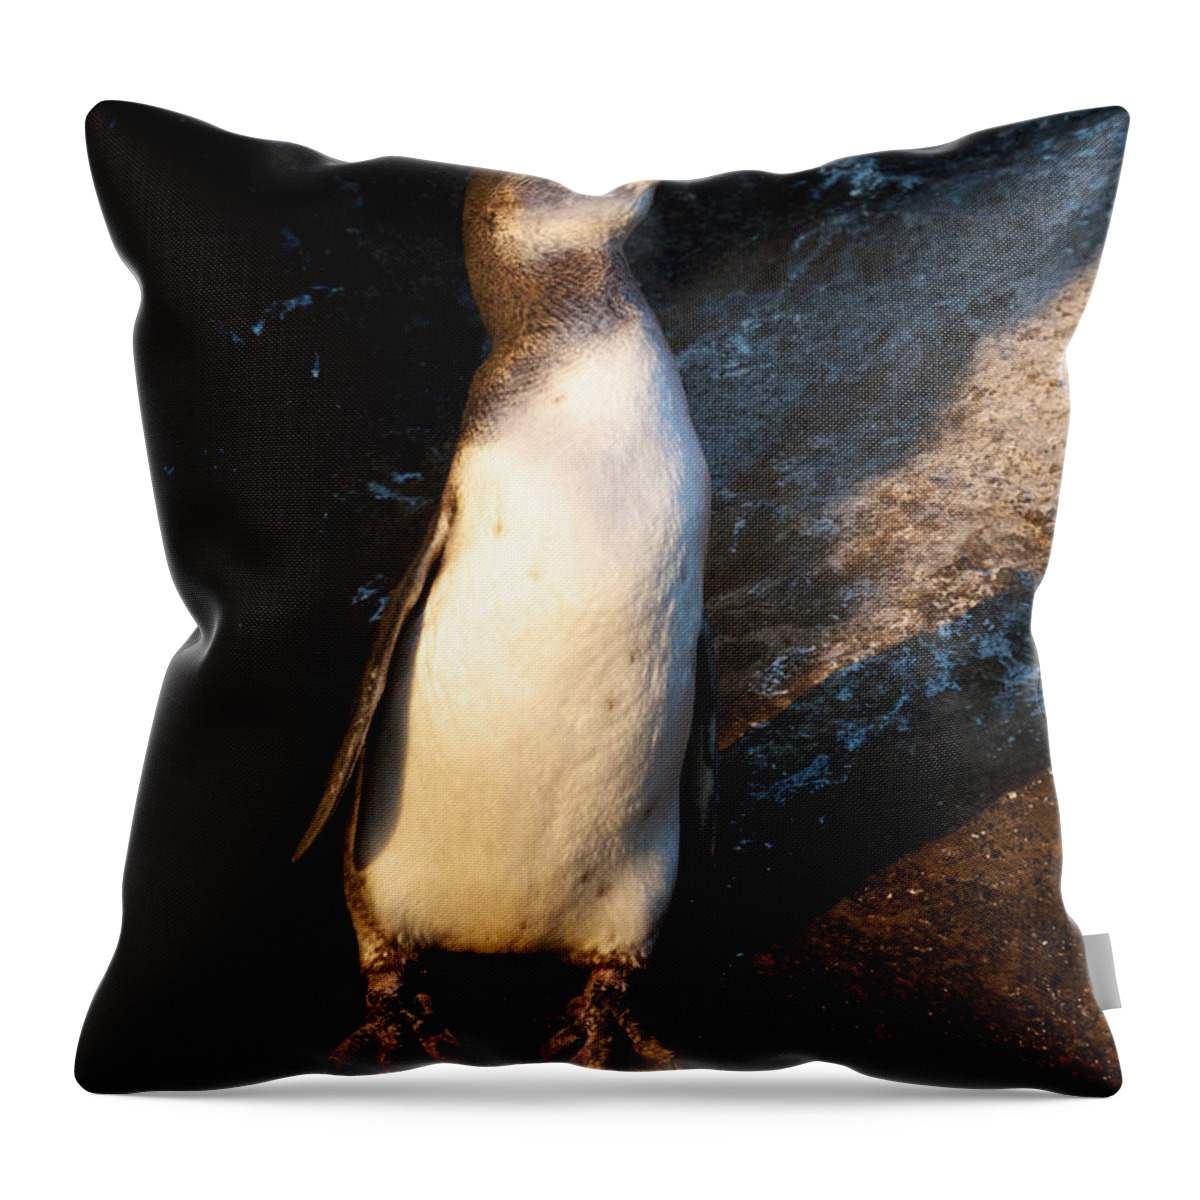 Galapagos Islands Throw Pillow featuring the photograph All Dressed Up by David Beebe